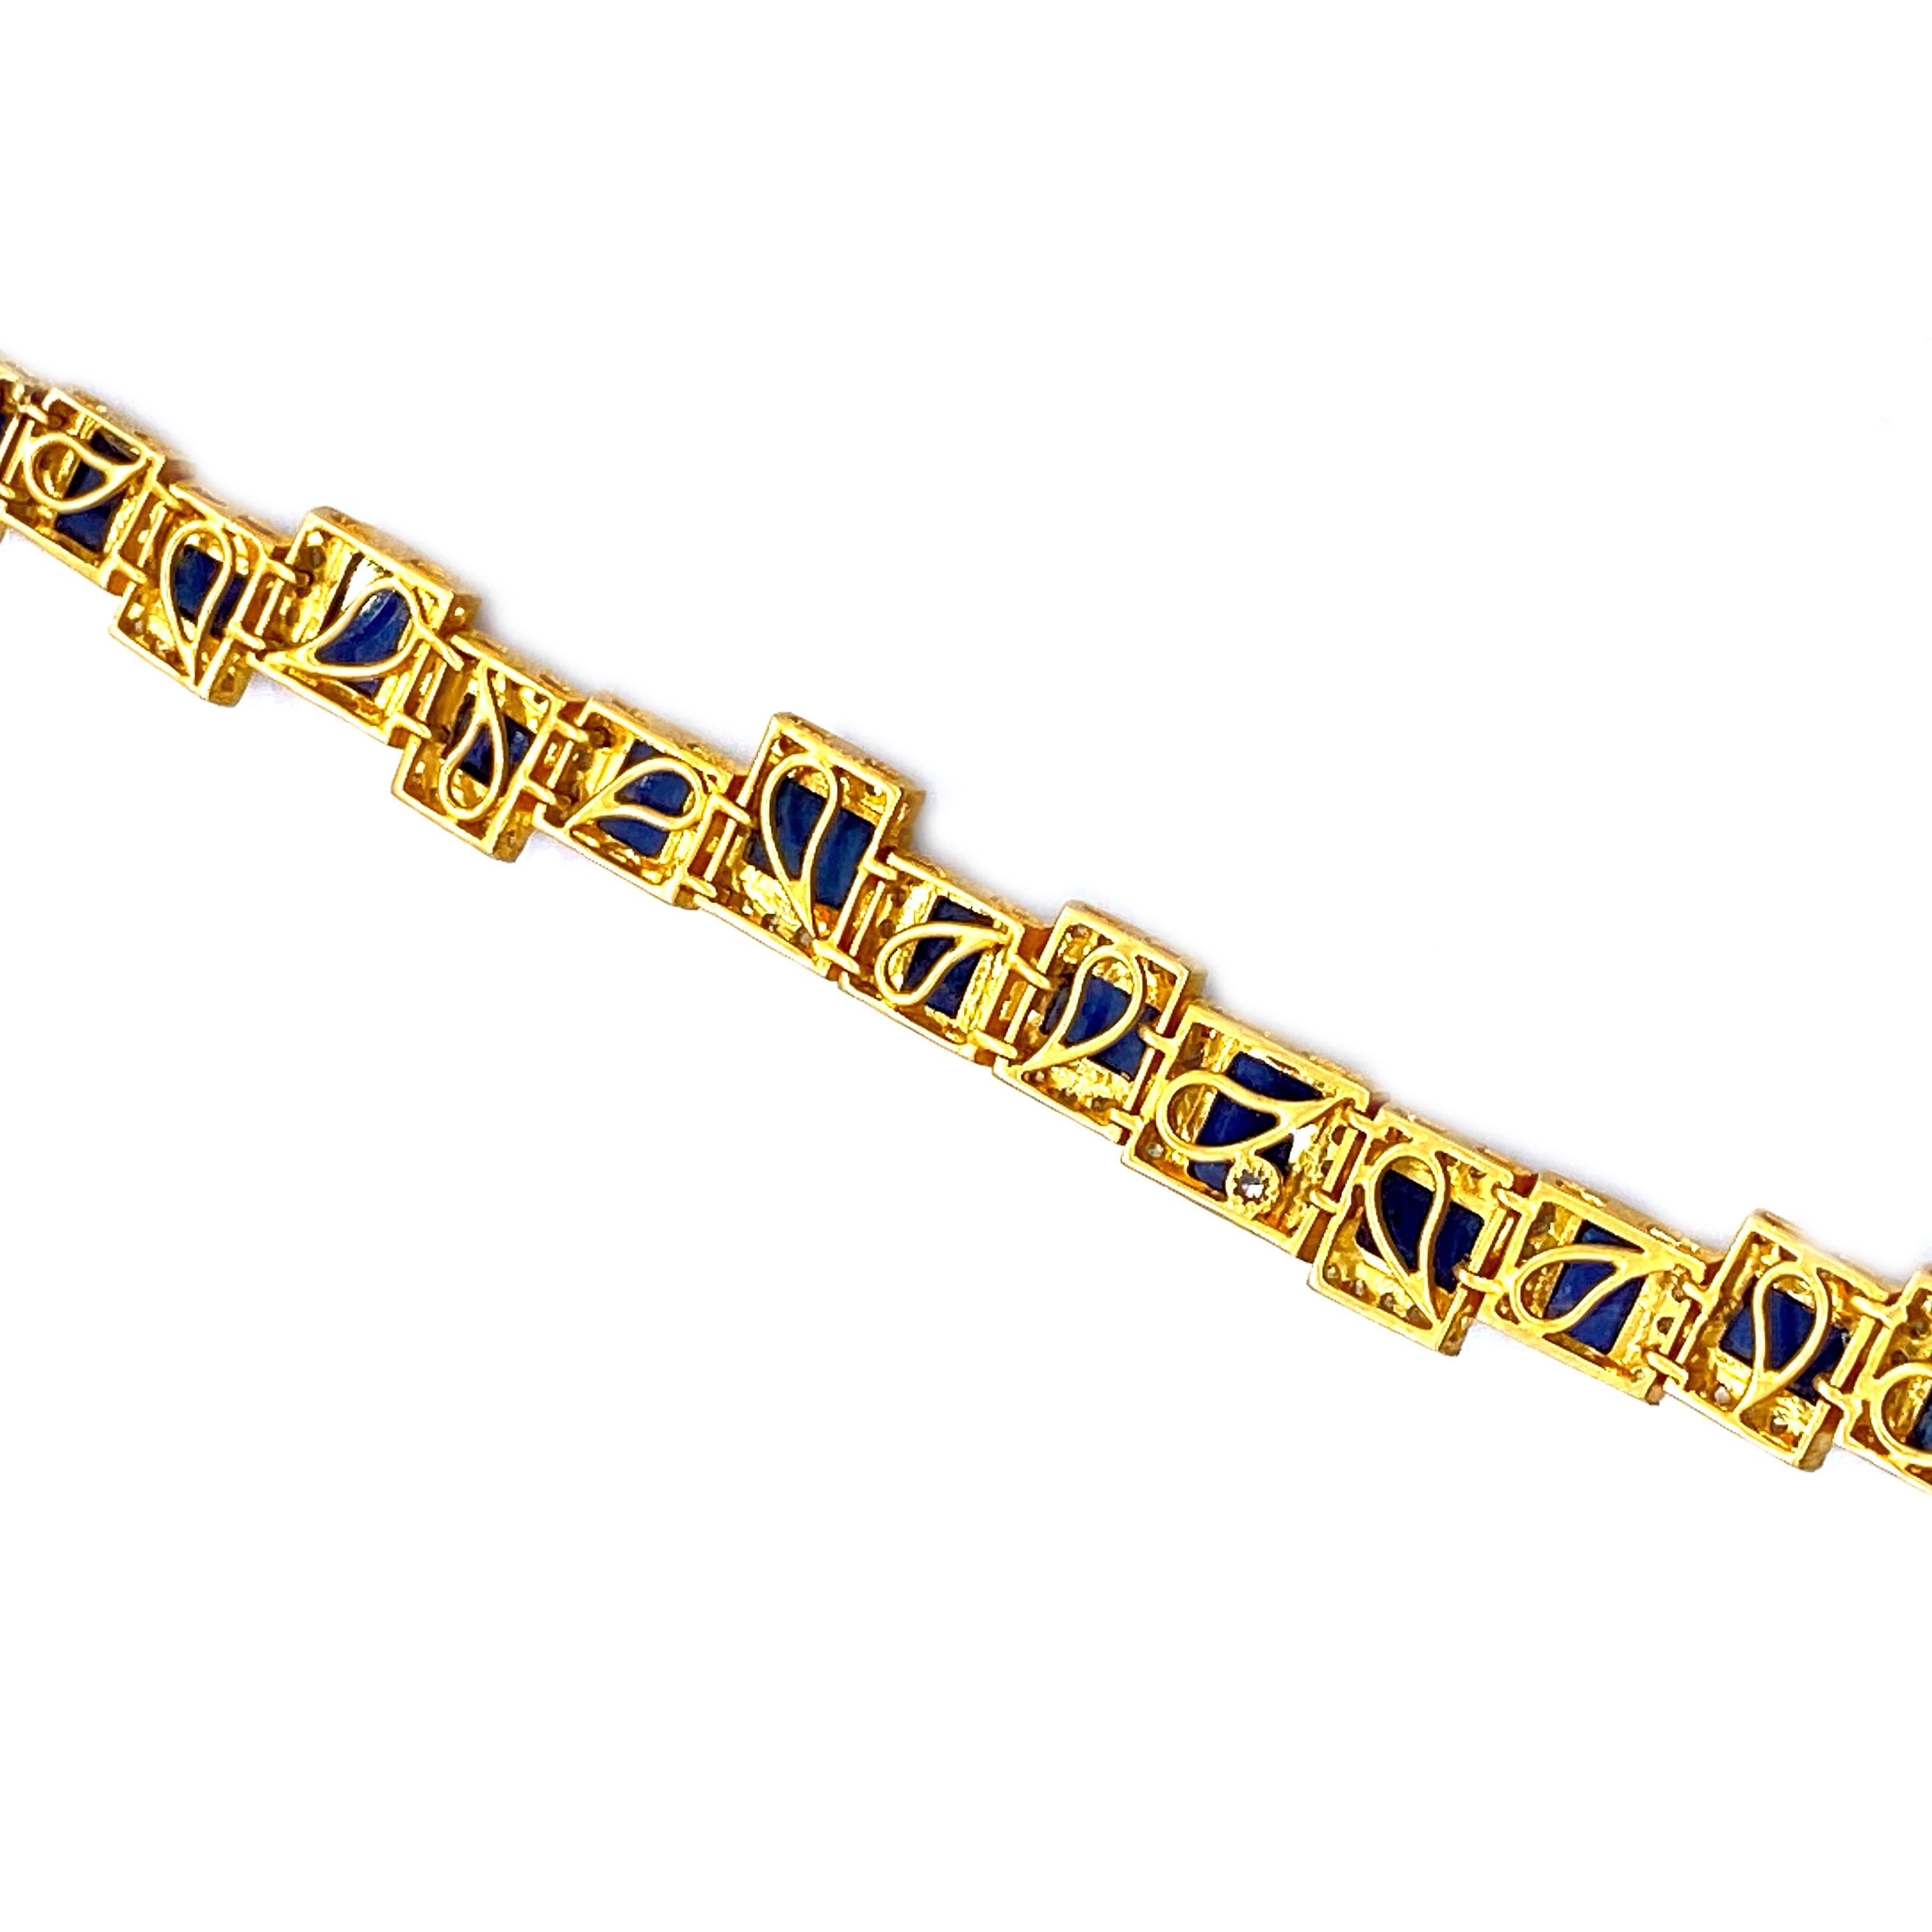 The bold colors and designs by Coomi are unmistakable, featuring Blue Sapphire 19.41cts and Diamonds 1.51cs set in 20K Yellow Gold. Bracelet has been inspired by Mosaic and Art Deco, from Coomi's Affinity collection, which consists of represents a